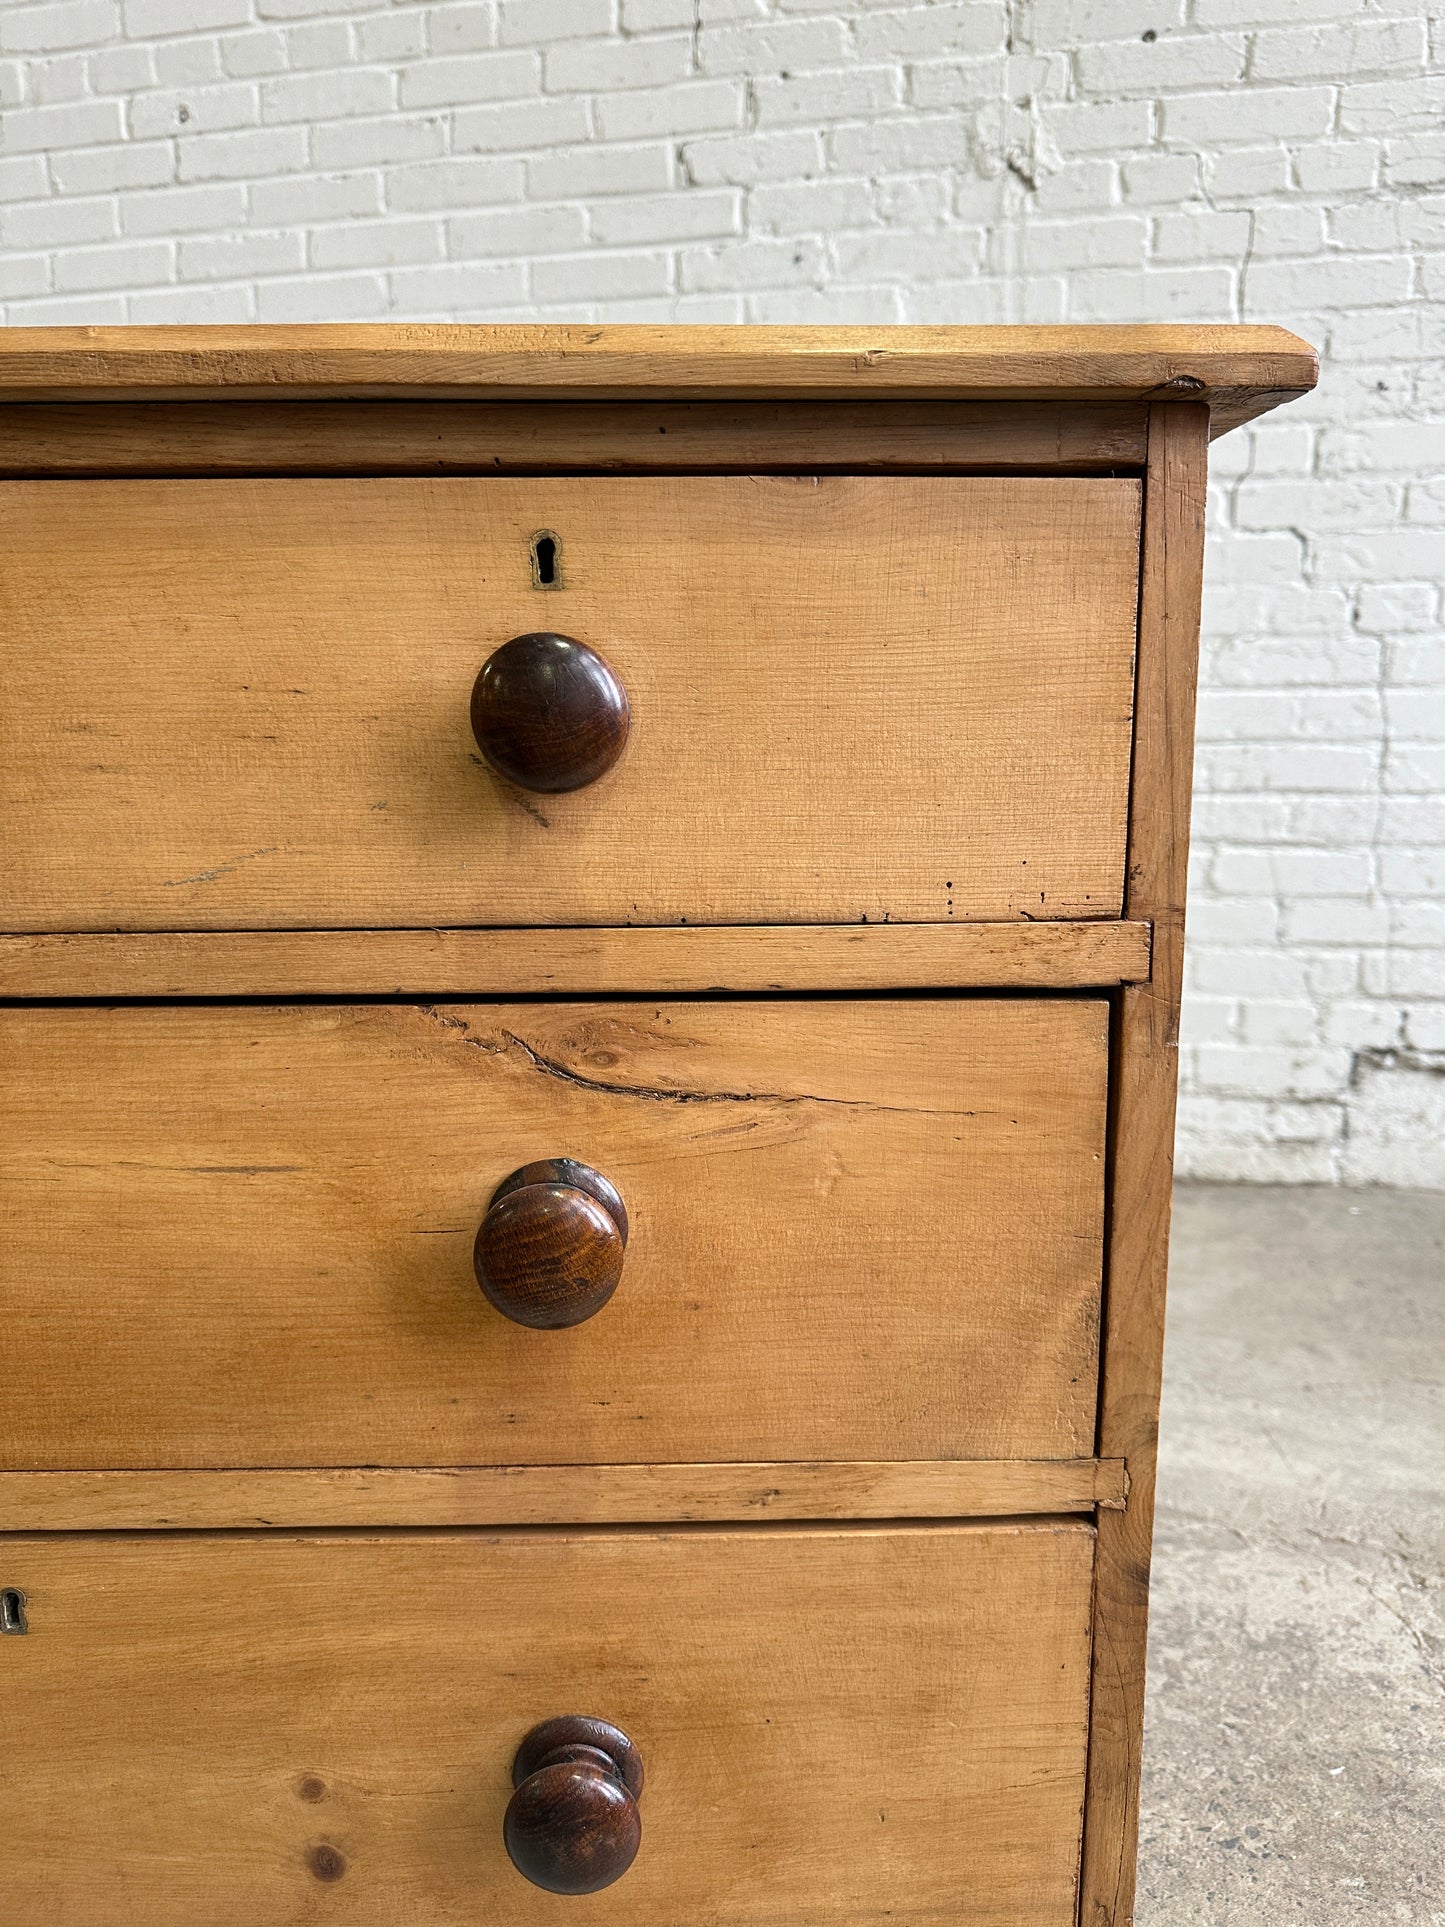 Antique Pine Chest of Drawers with Mahogany Knobs c. 1890